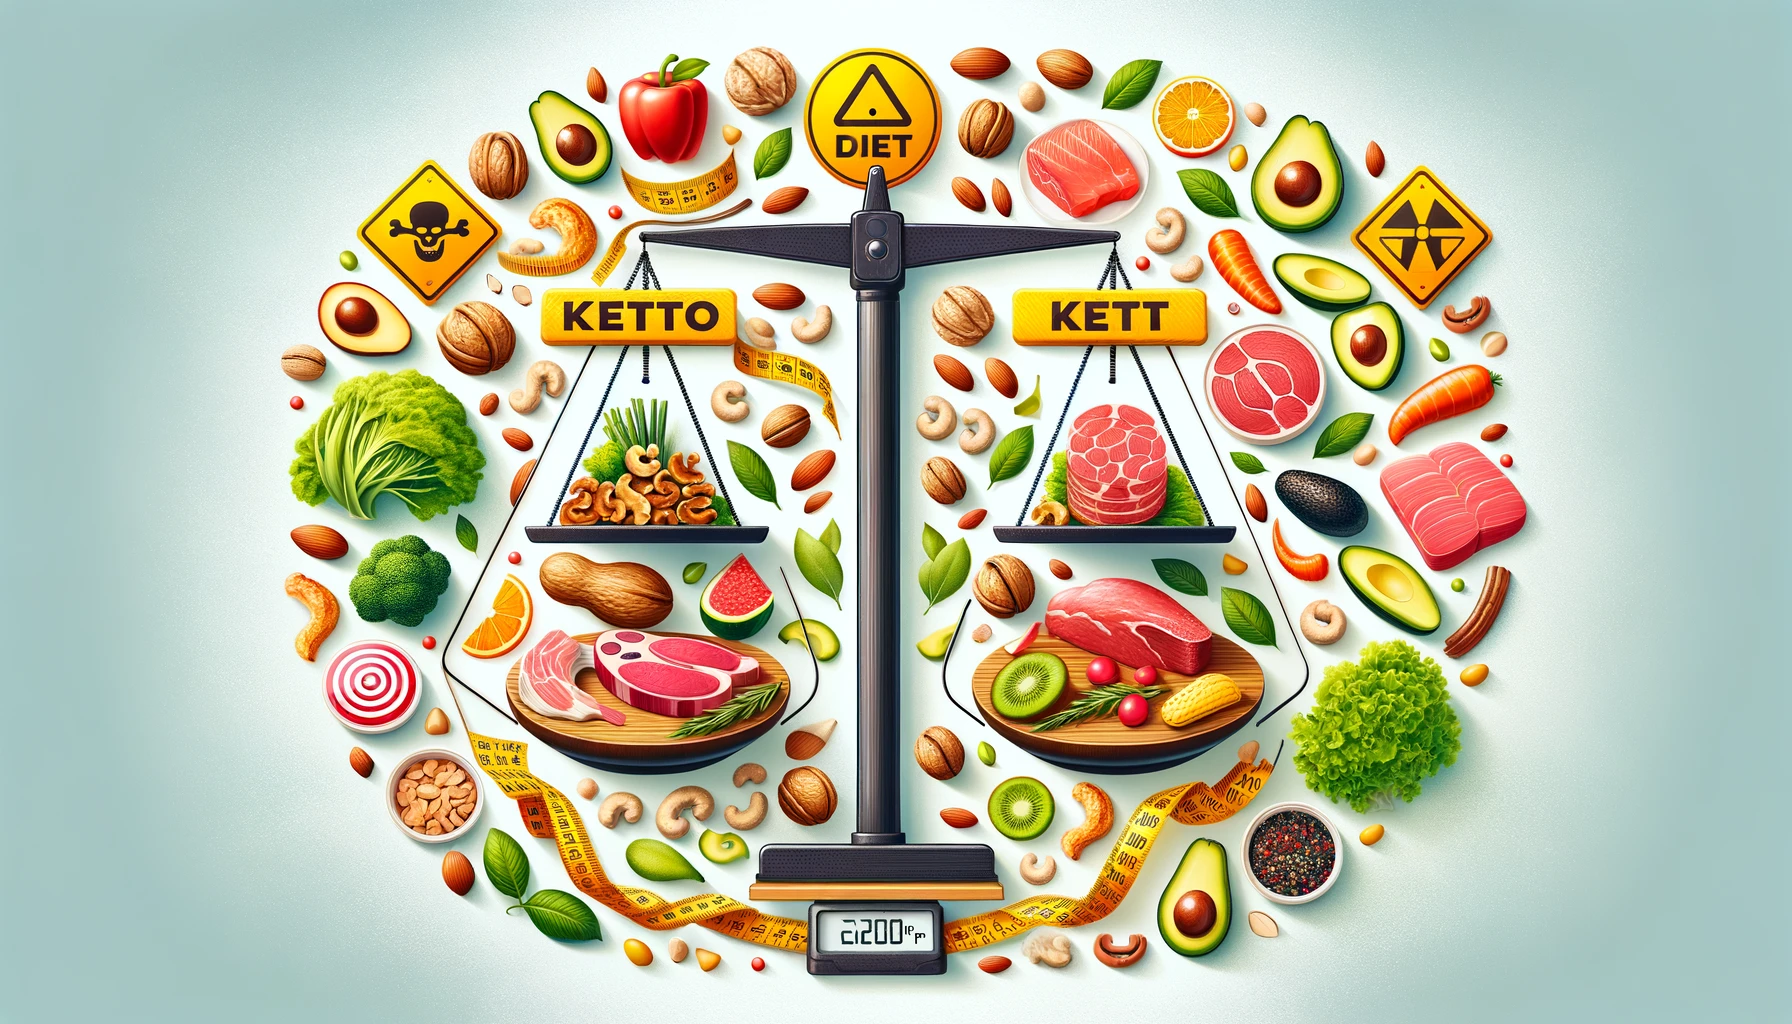 The Truth About Keto: Benefits and Risks of the Keto Diet